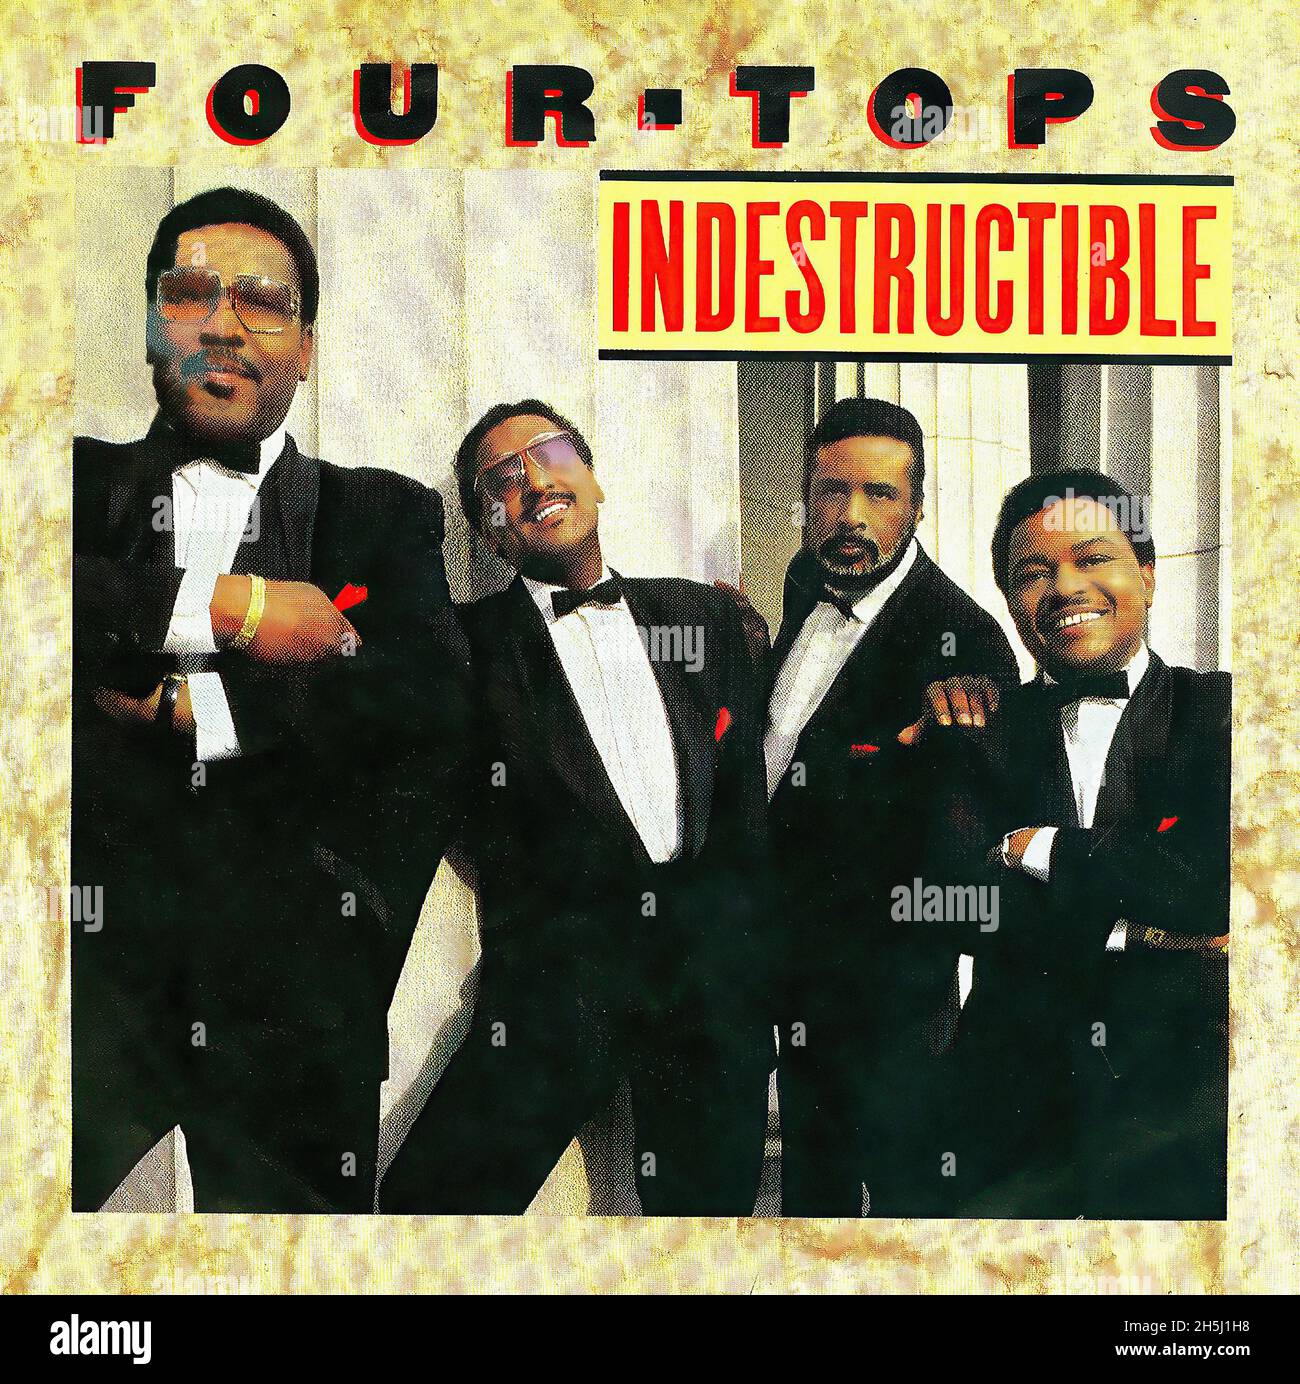 Vintage single record cover - Four Tops, The - Indestructible - D - 1988 Stock Photo